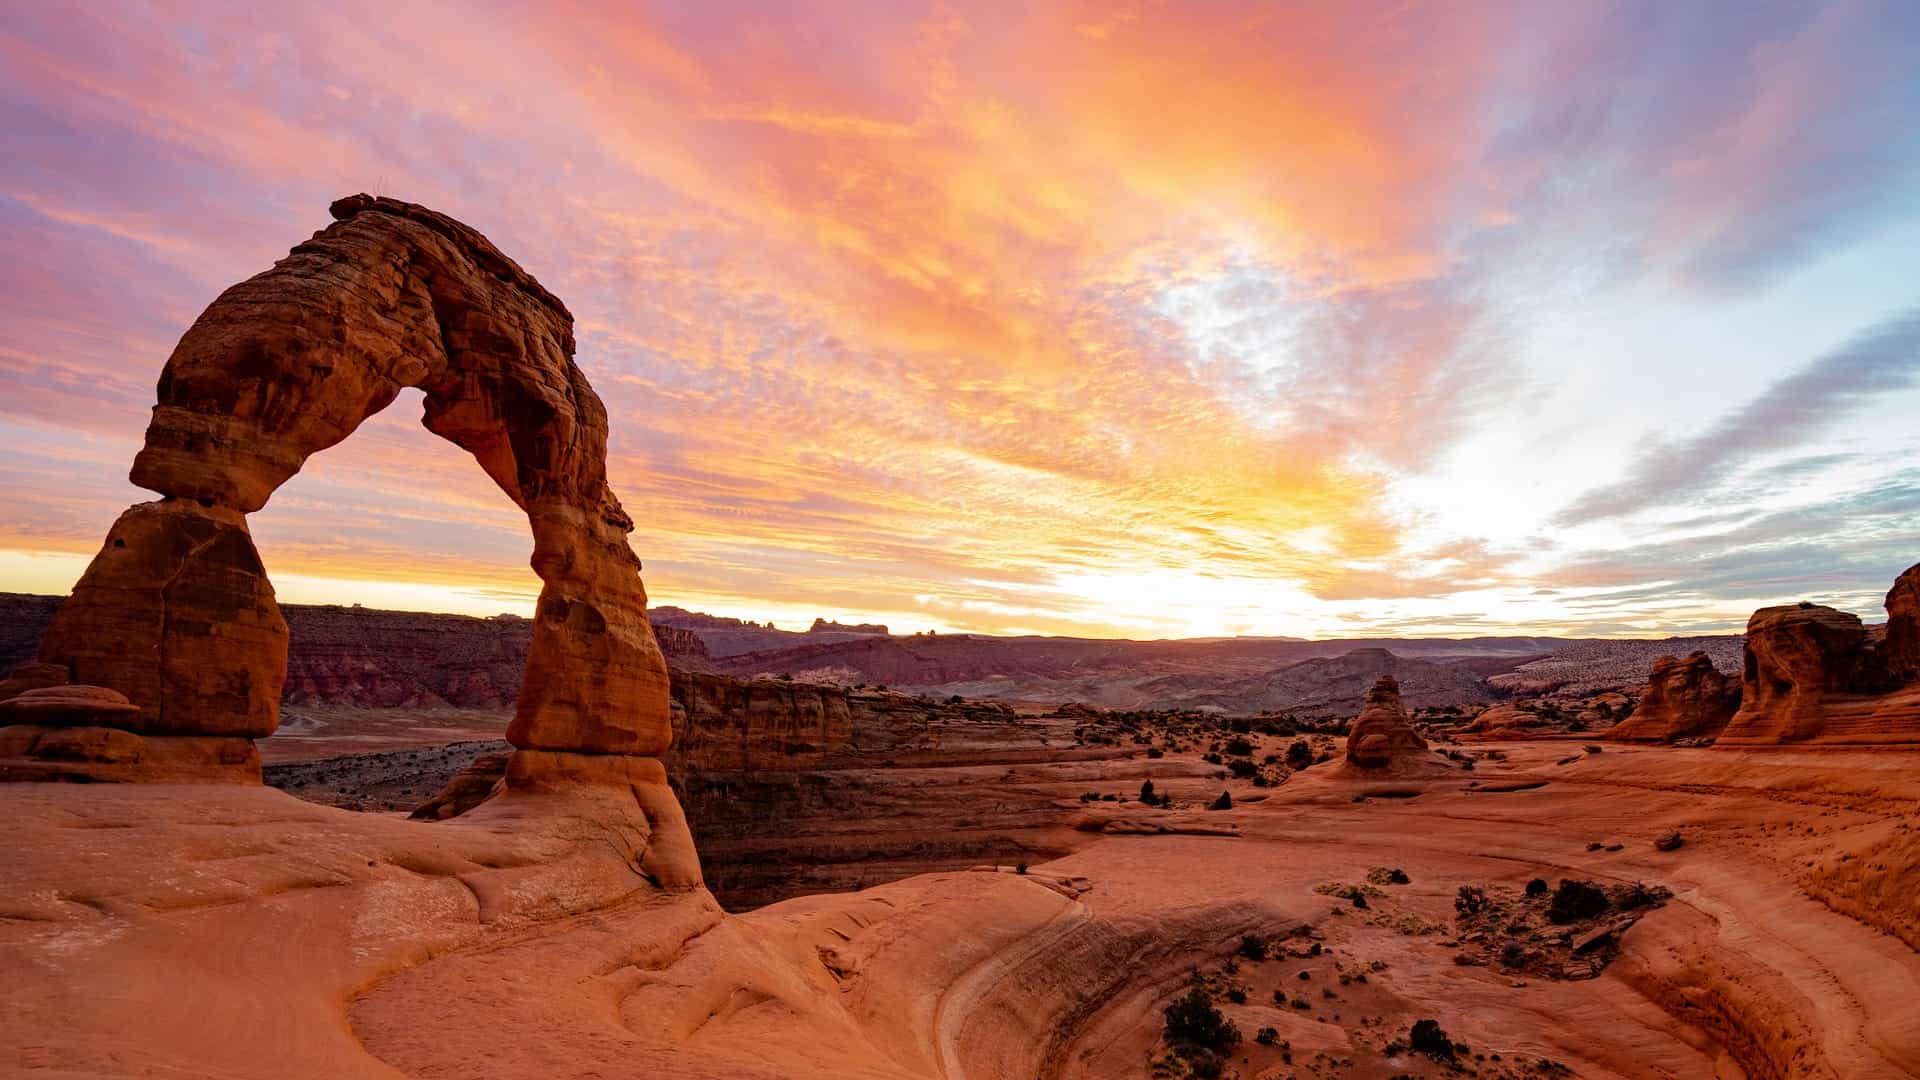 Best things to do in Moab Utah - Rosanne McHenry - Delicate Arch at Arches National Park by Tom Gainor on Unsplash